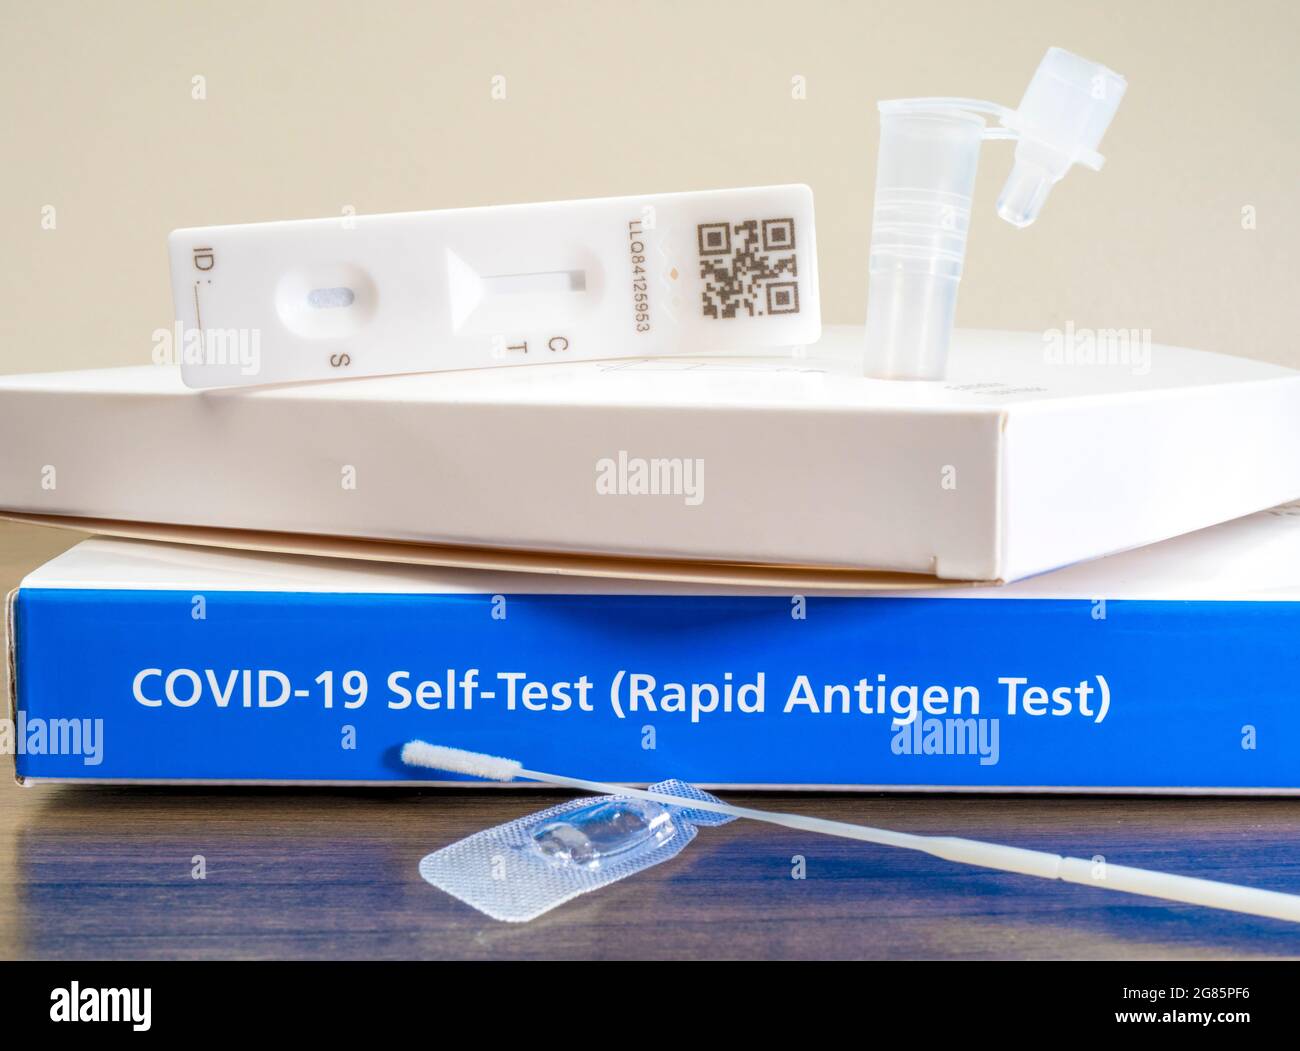 Closeup POV shot of an unbranded Covid-19 rapid antigen, self-test kit, with the contents of one test laid out ready to be used. Stock Photo